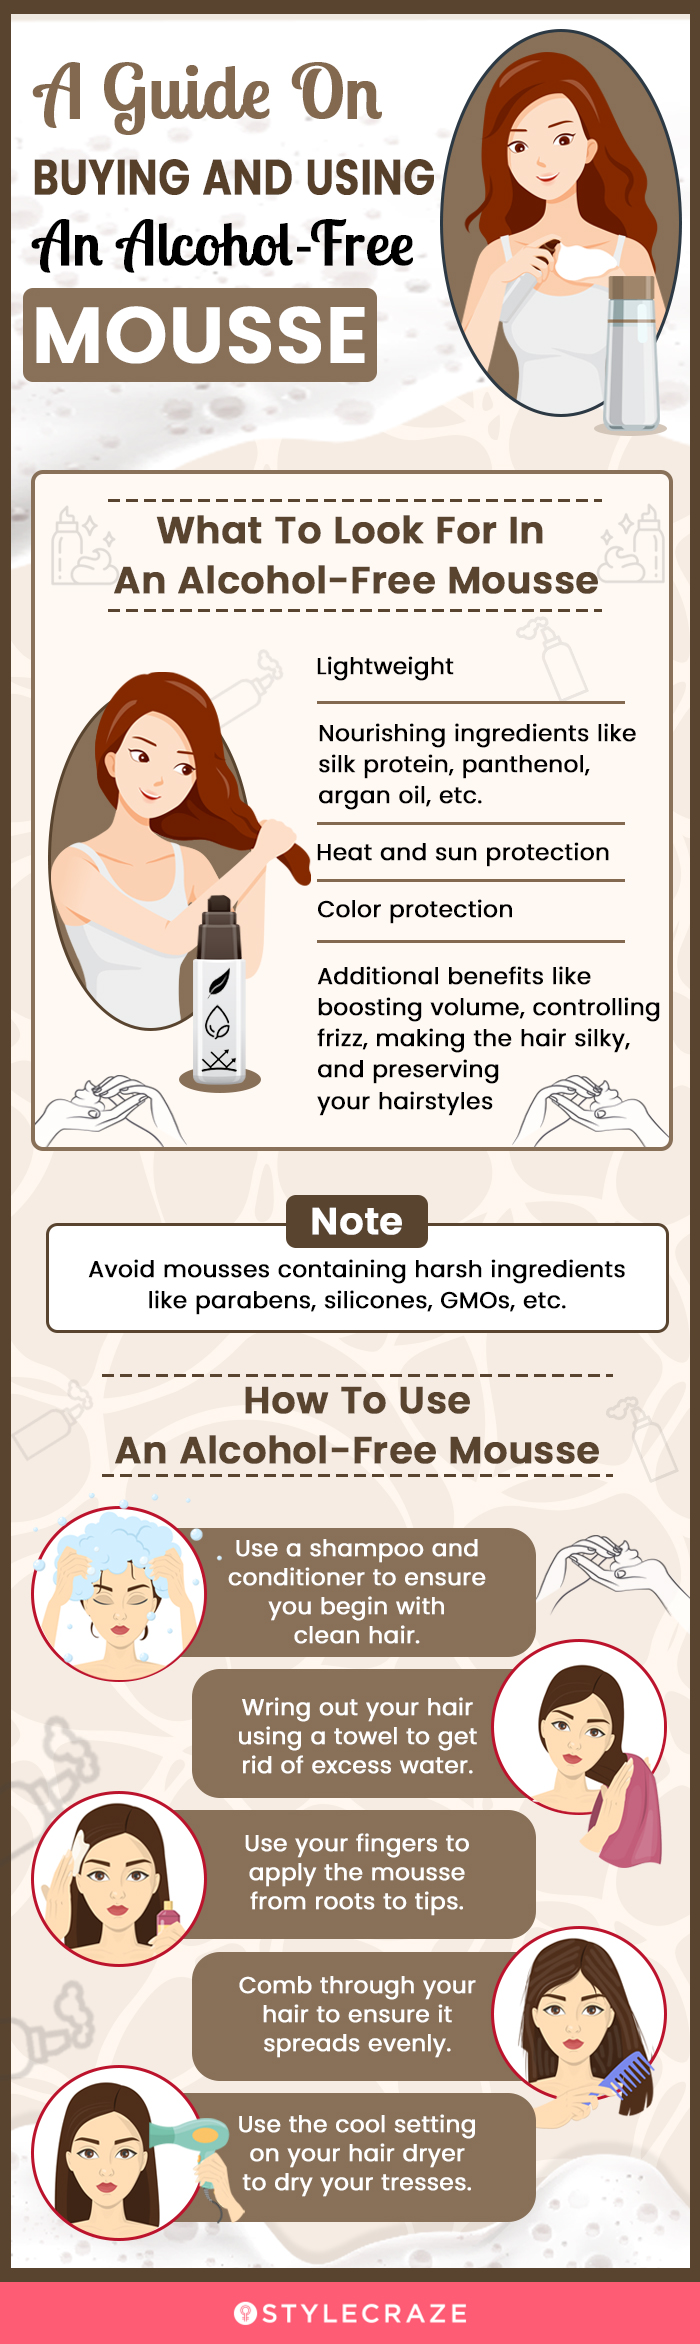 A Guide On Buying And Using An Alcohol-Free Mousse (infographic)